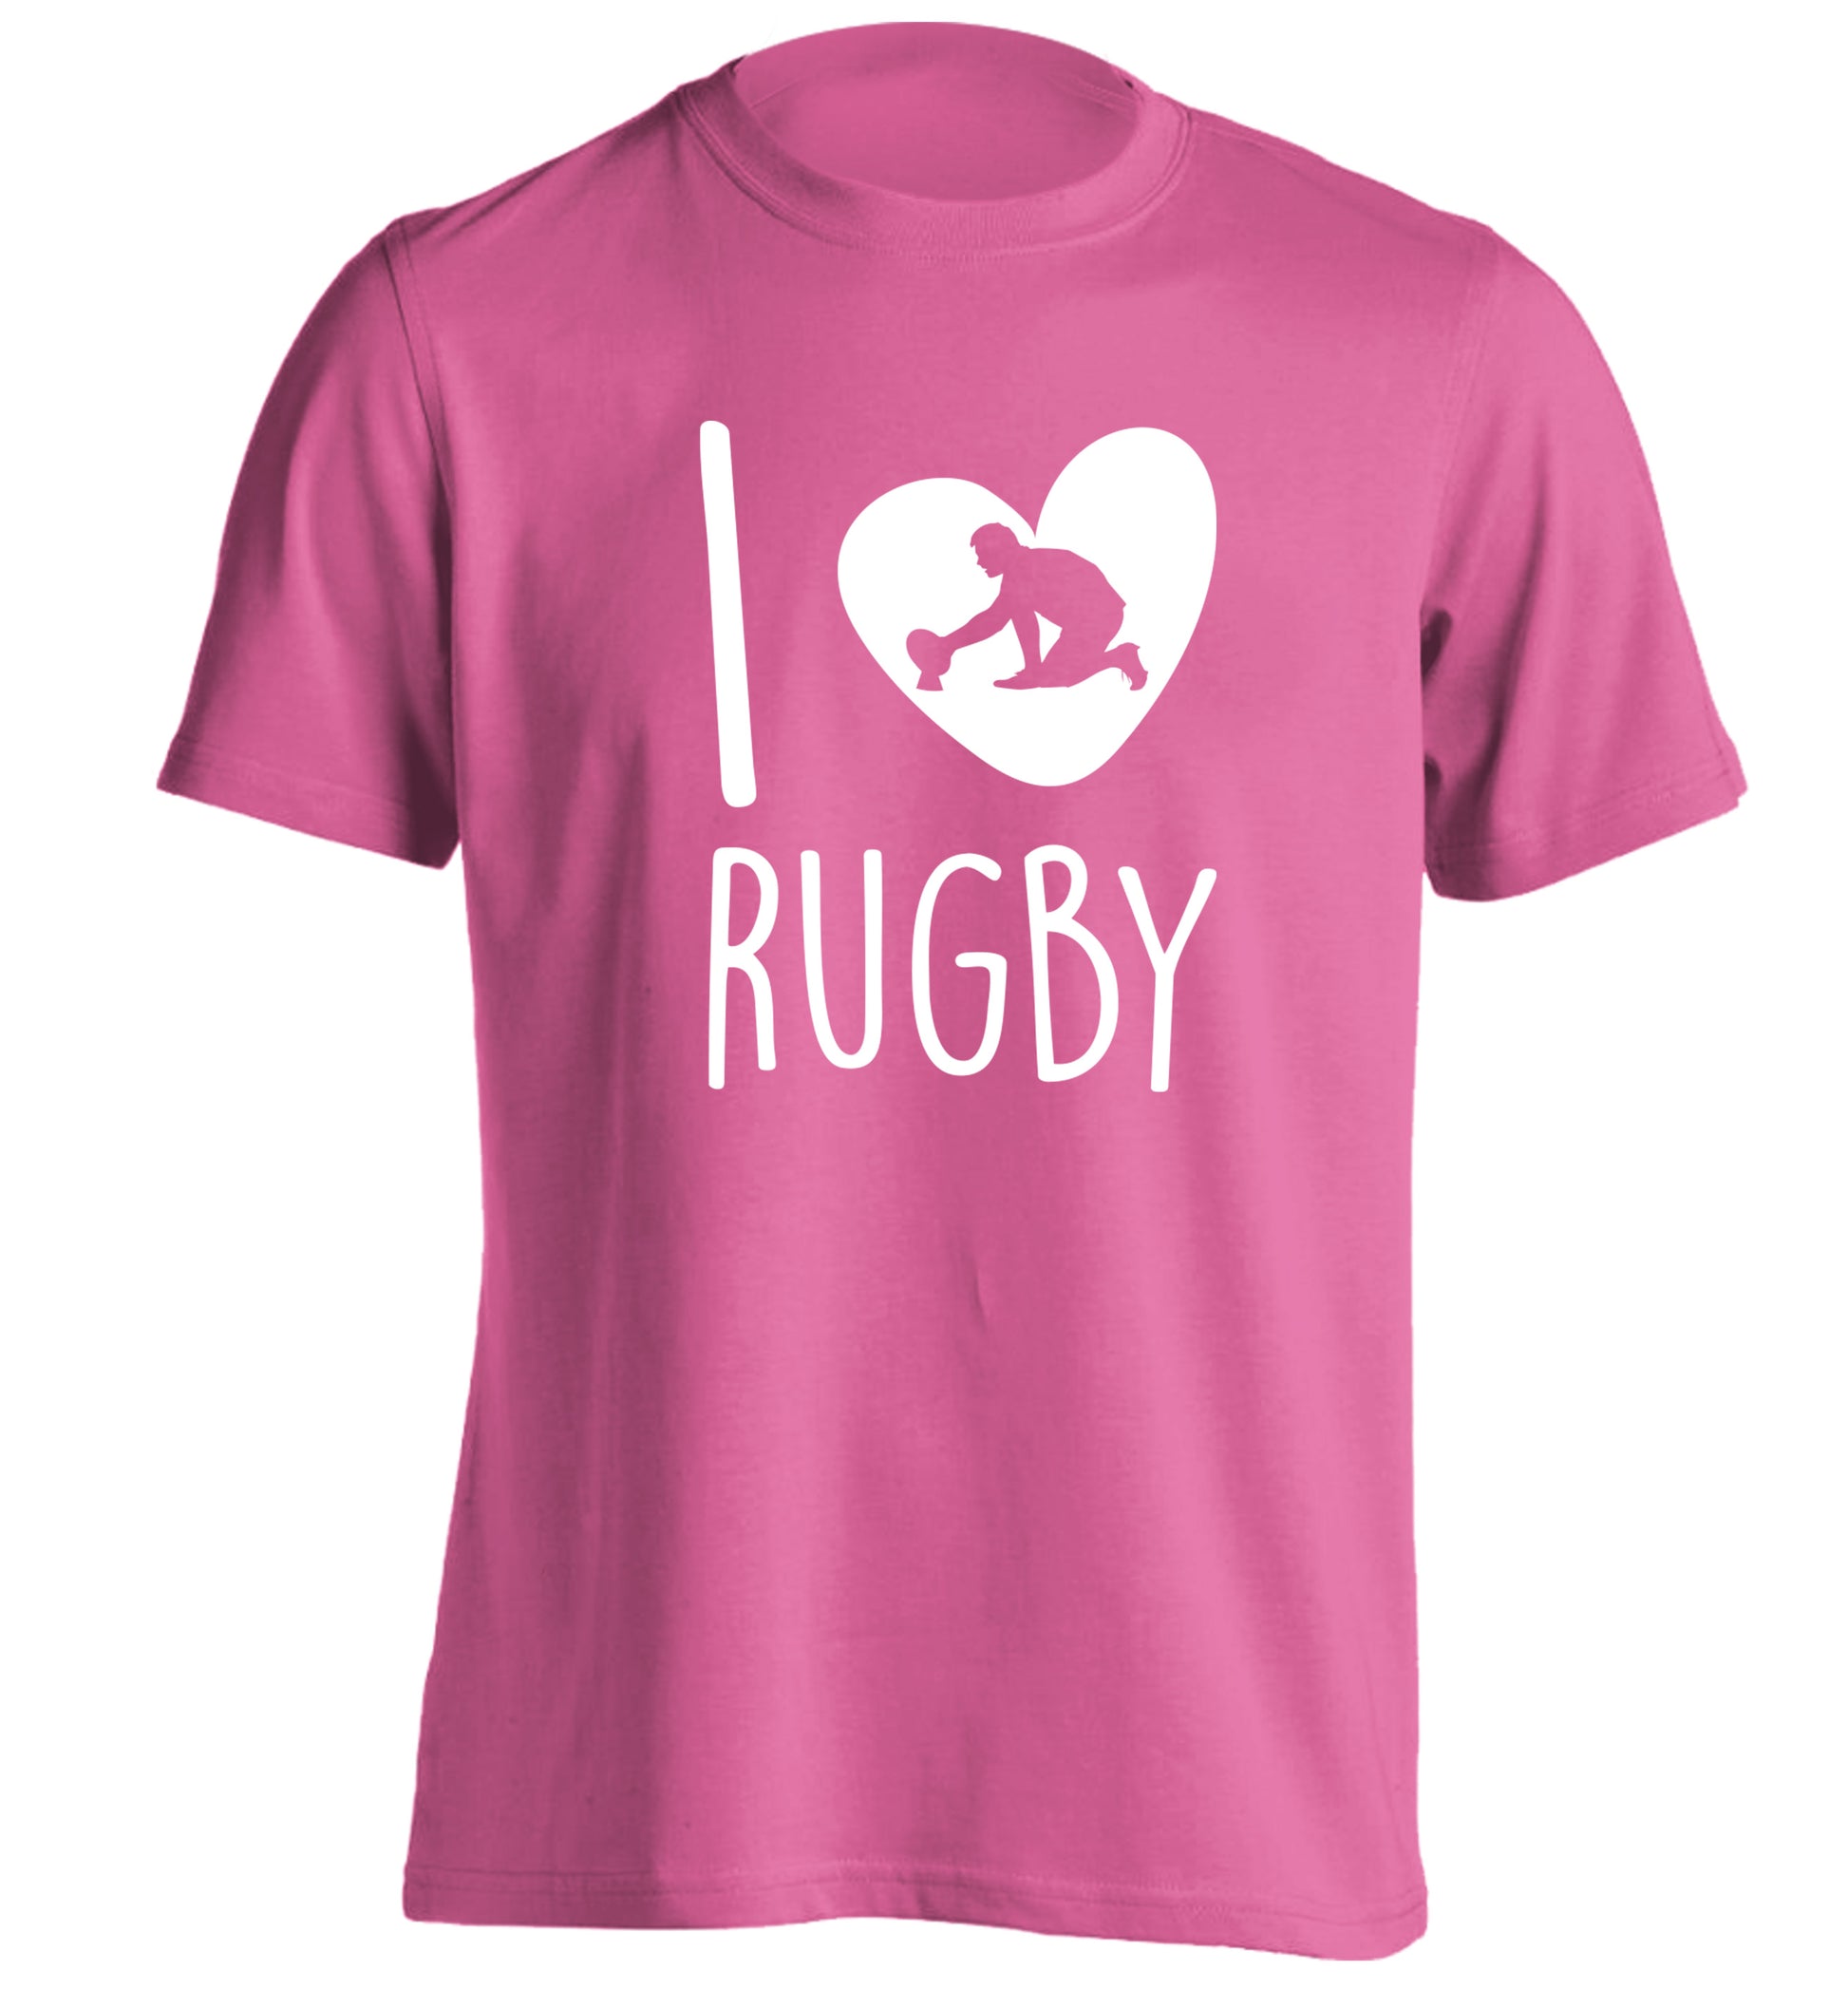 I love rugby adults unisex pink Tshirt 2XL